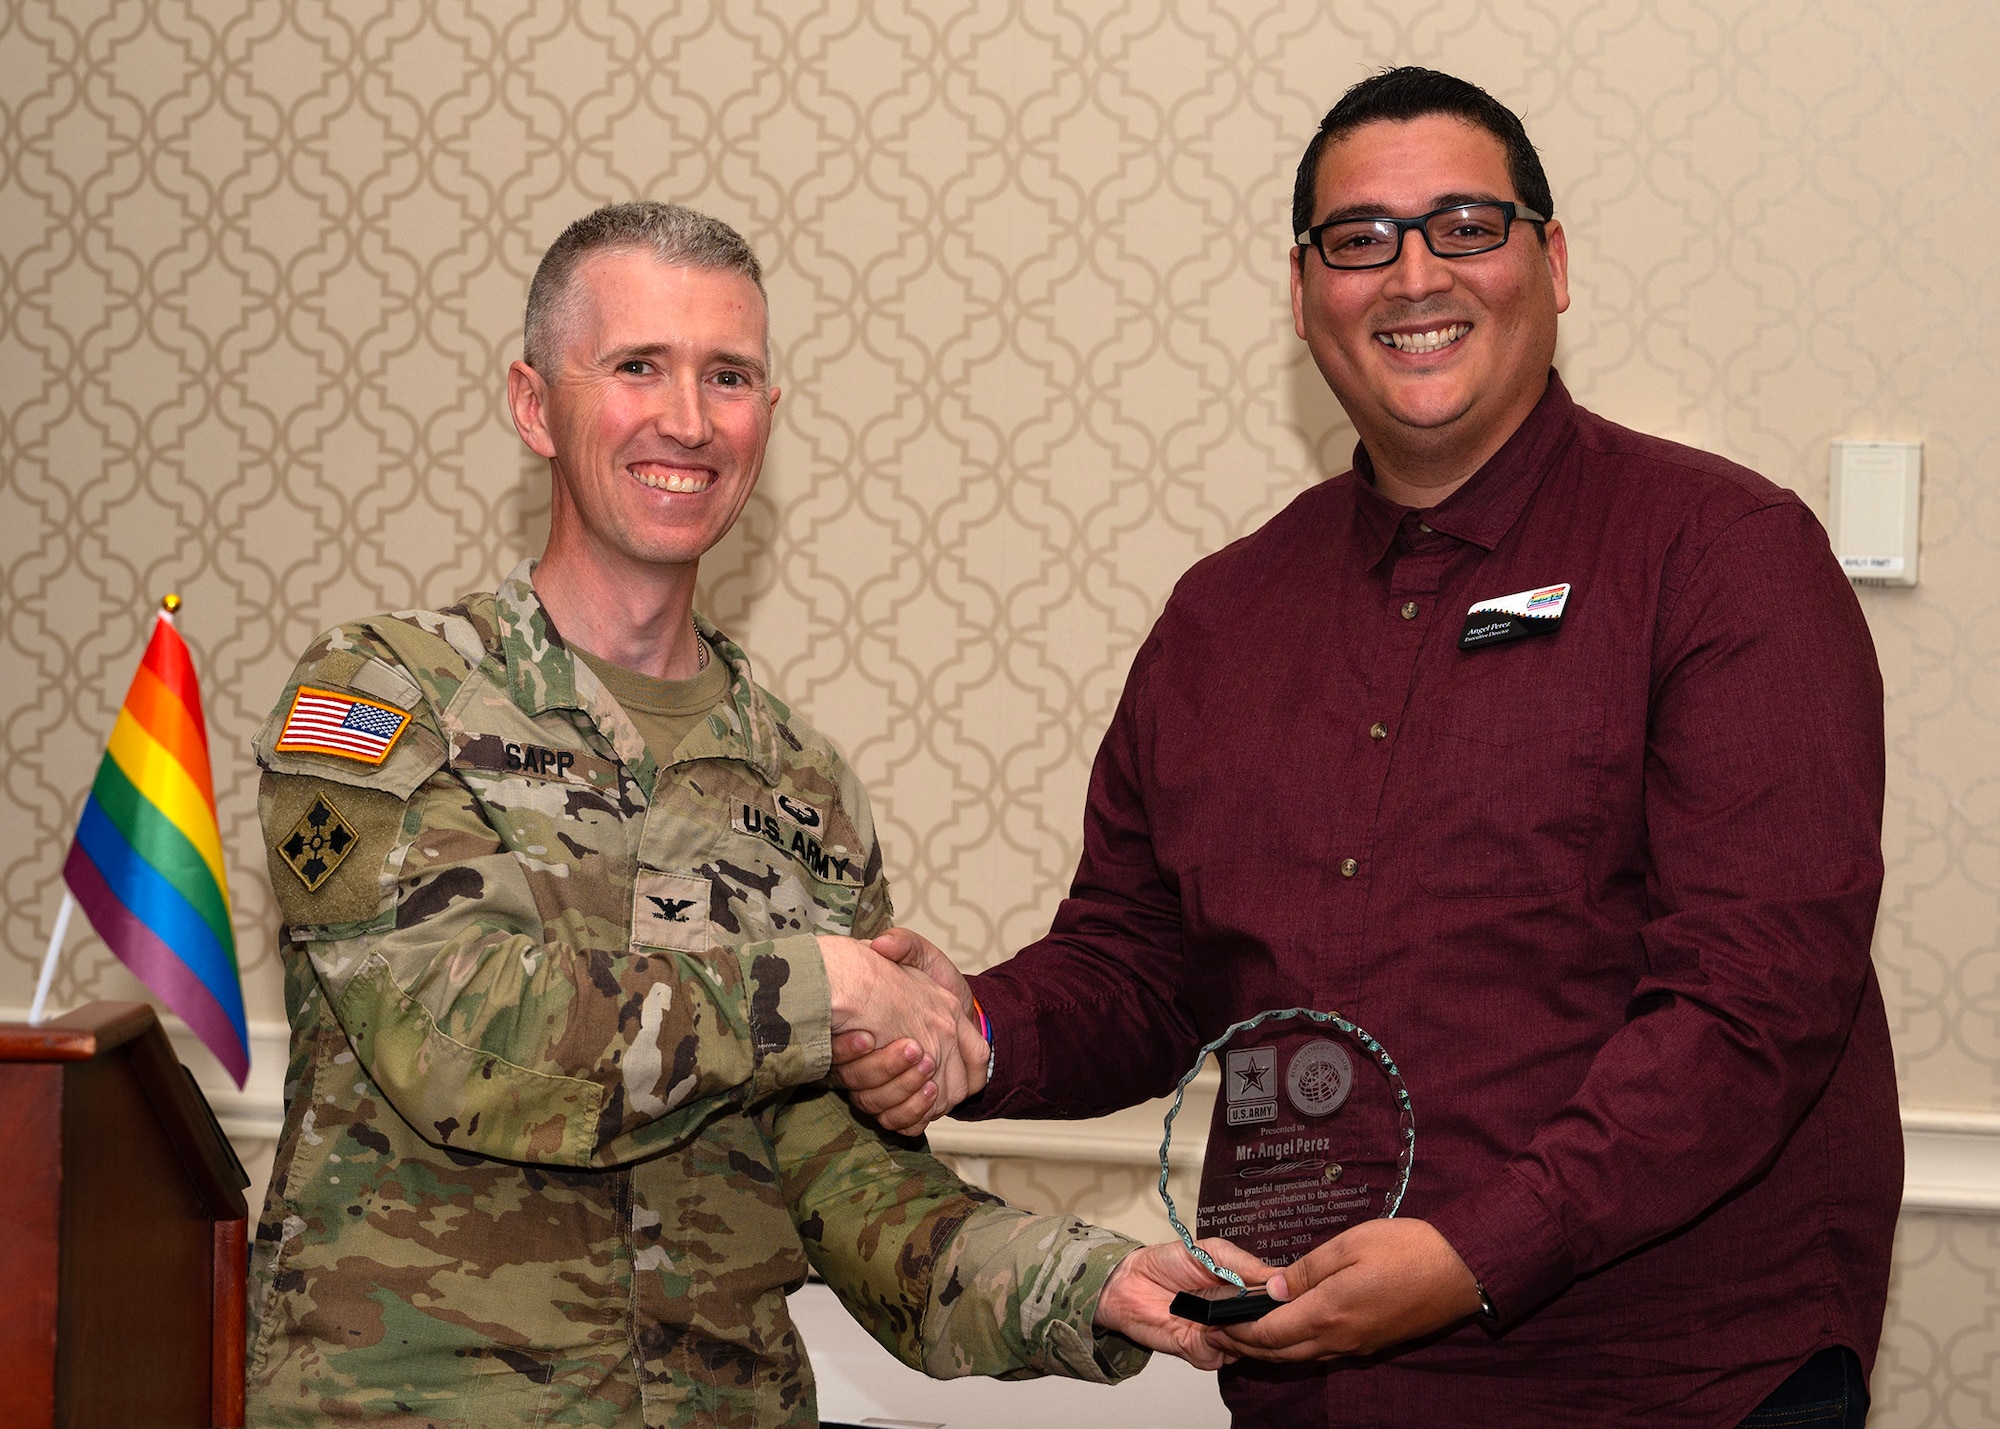 U.S. Army Col. Michael A. Sapp, Fort George G. Meade Garrison commander, presents an appreciation award to Angel Perez, Caroline Pride chief executive officer and executive director, during a Pride Month symposium, June 28, 2023, at Fort George G. Meade, Maryland. Fort Meade Garrison and 70th Intelligence Surveillance, Reconnaissance Wing Diversity & Inclusion council hosted the event to celebrate, recognize and educate communities to uphold equality, dignity, and respect for all. (U.S. Air Force photo by Staff Sgt. Kevin Iinuma)